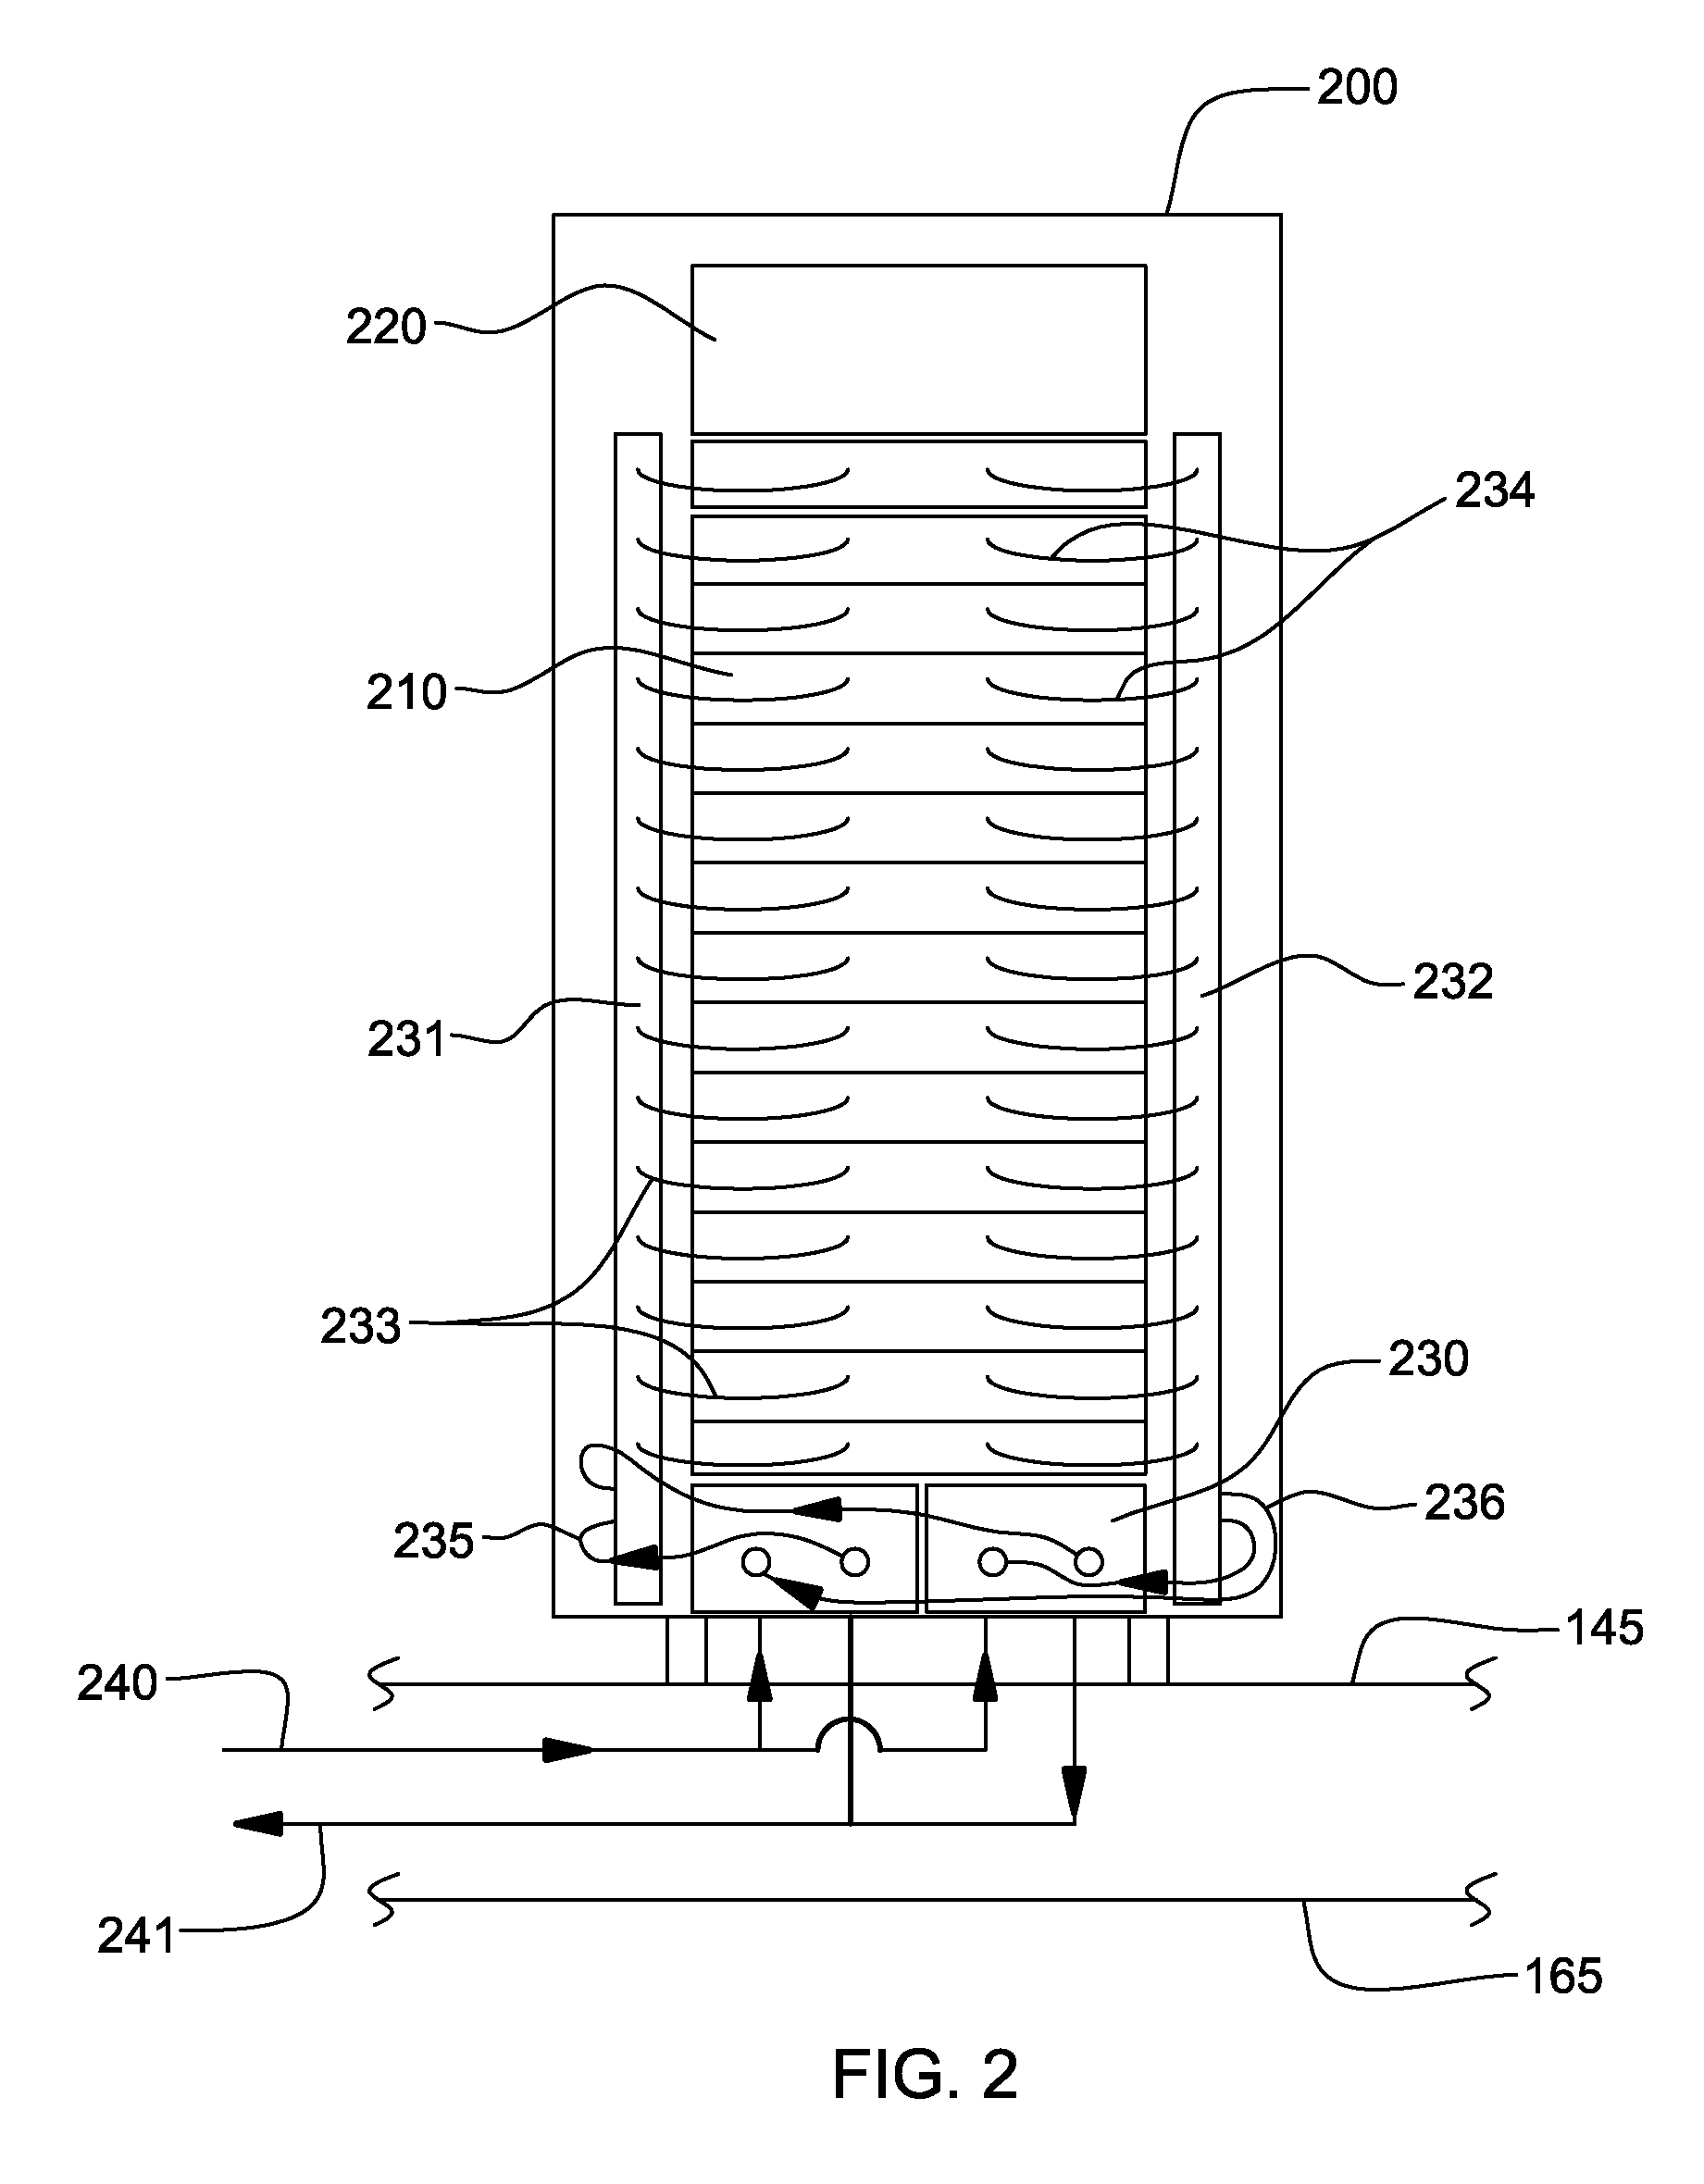 Sectioned manifolds facilitating pumped immersion-cooling of electronic components